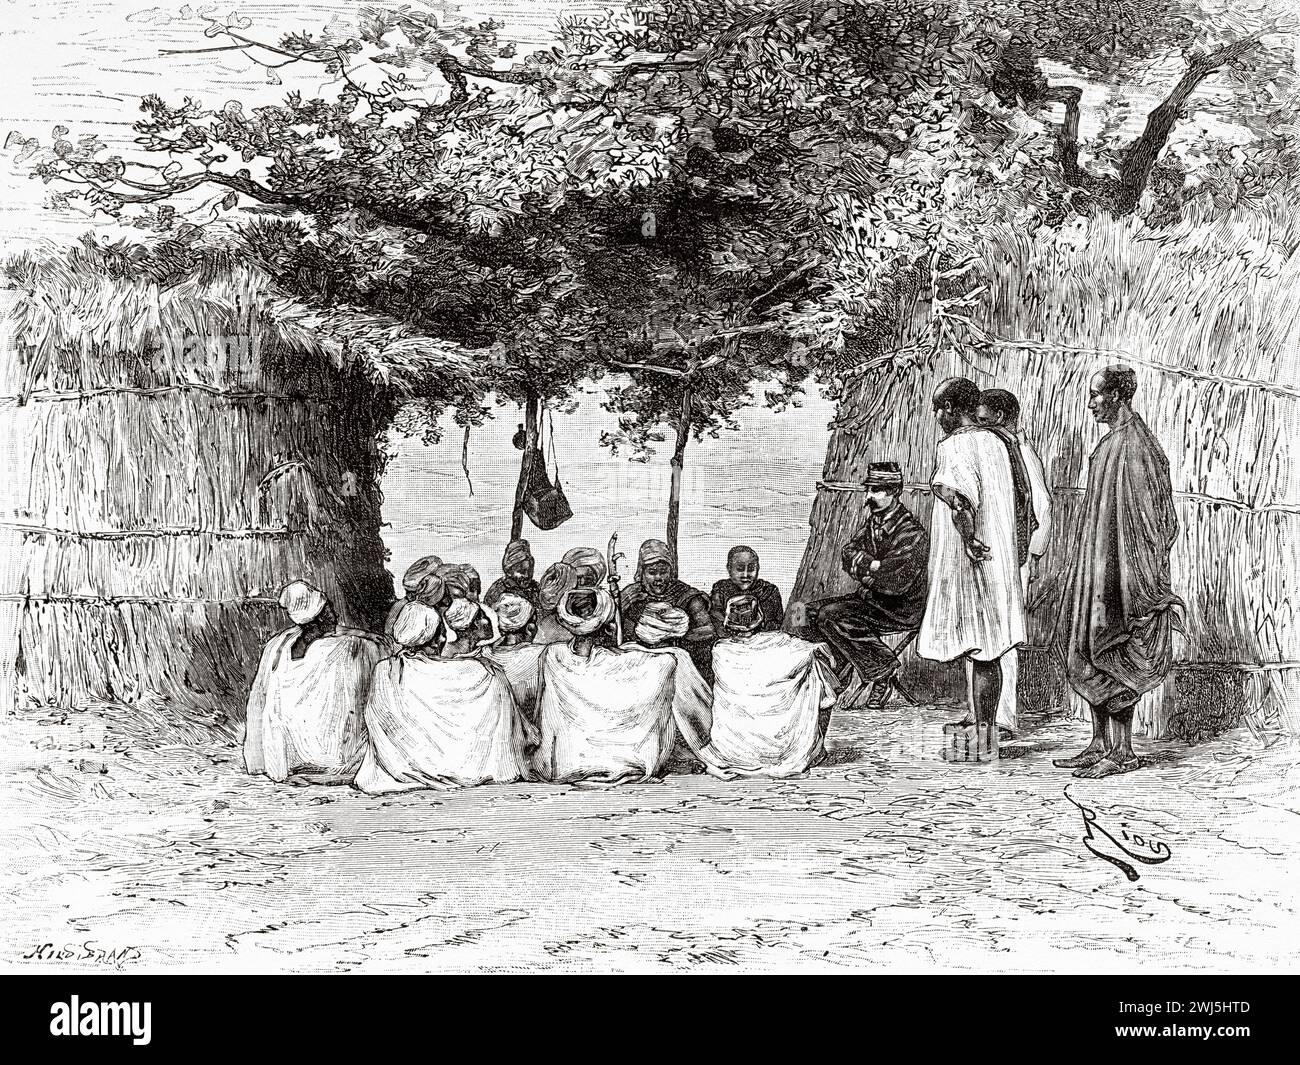 Meeting with members of the town of Niagassola, Guinea. Africa. Two campaigns in French Sudan, 1886-1888 by Joseph Simon Gallieni (1849 - 1916) Le Tour du Monde 1890 Stock Photo